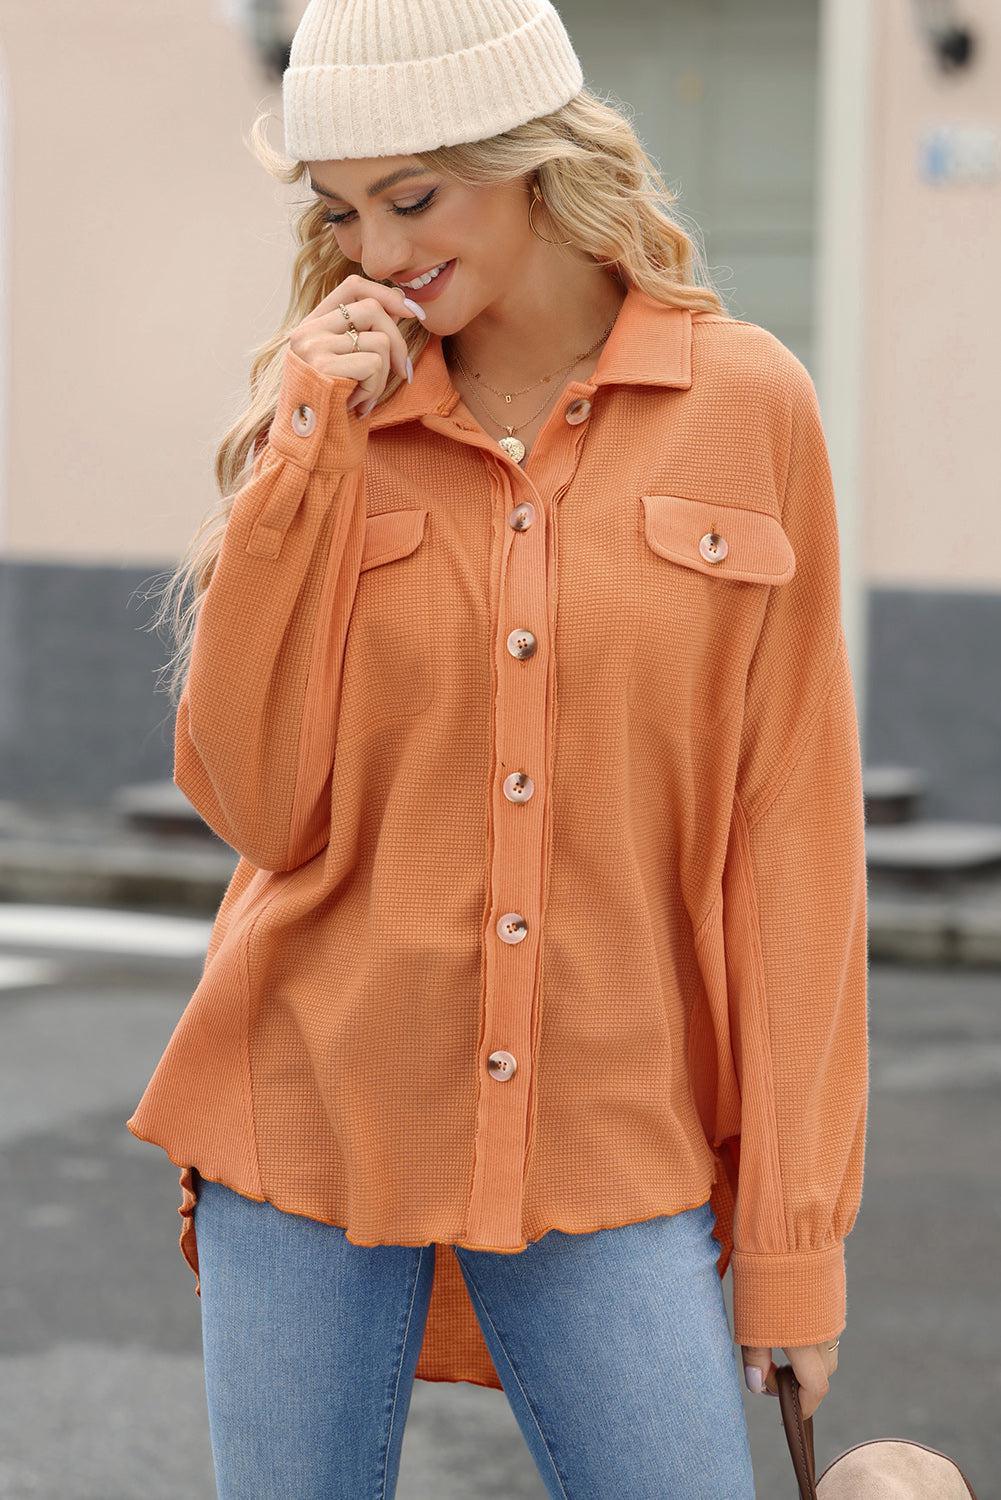 a woman in an orange shirt talking on a cell phone